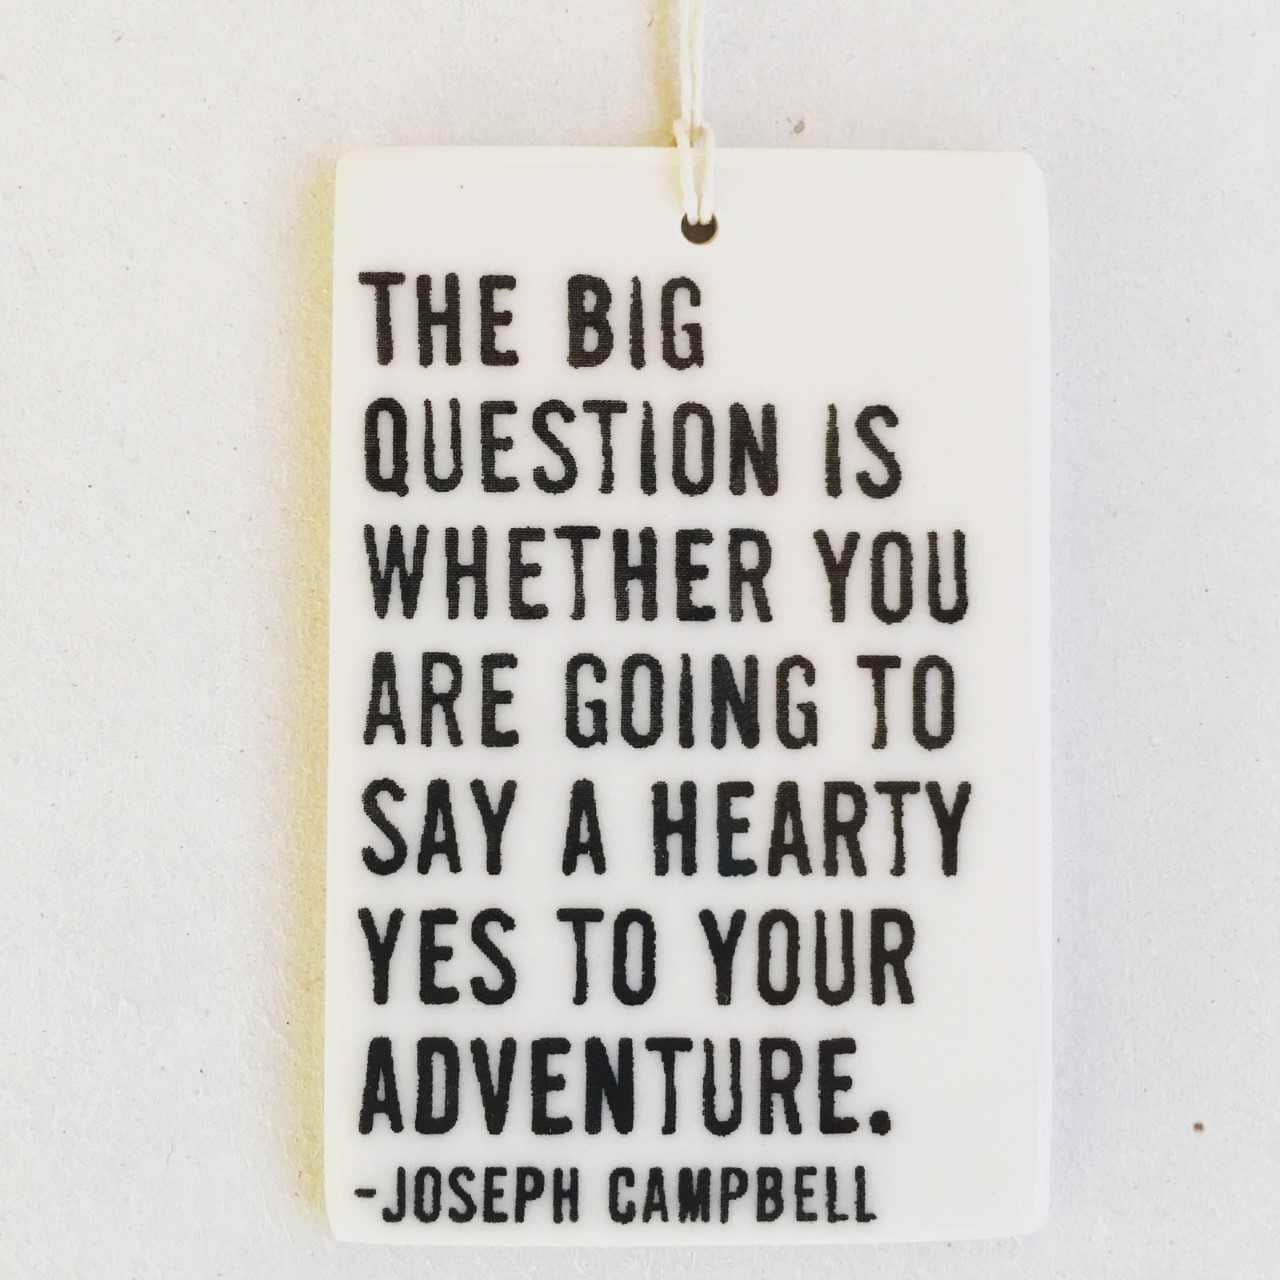 joseph campbell quote | ceramic wall tag | ceramic wall art | adventure | the big question | daily reminder | daily inspiration